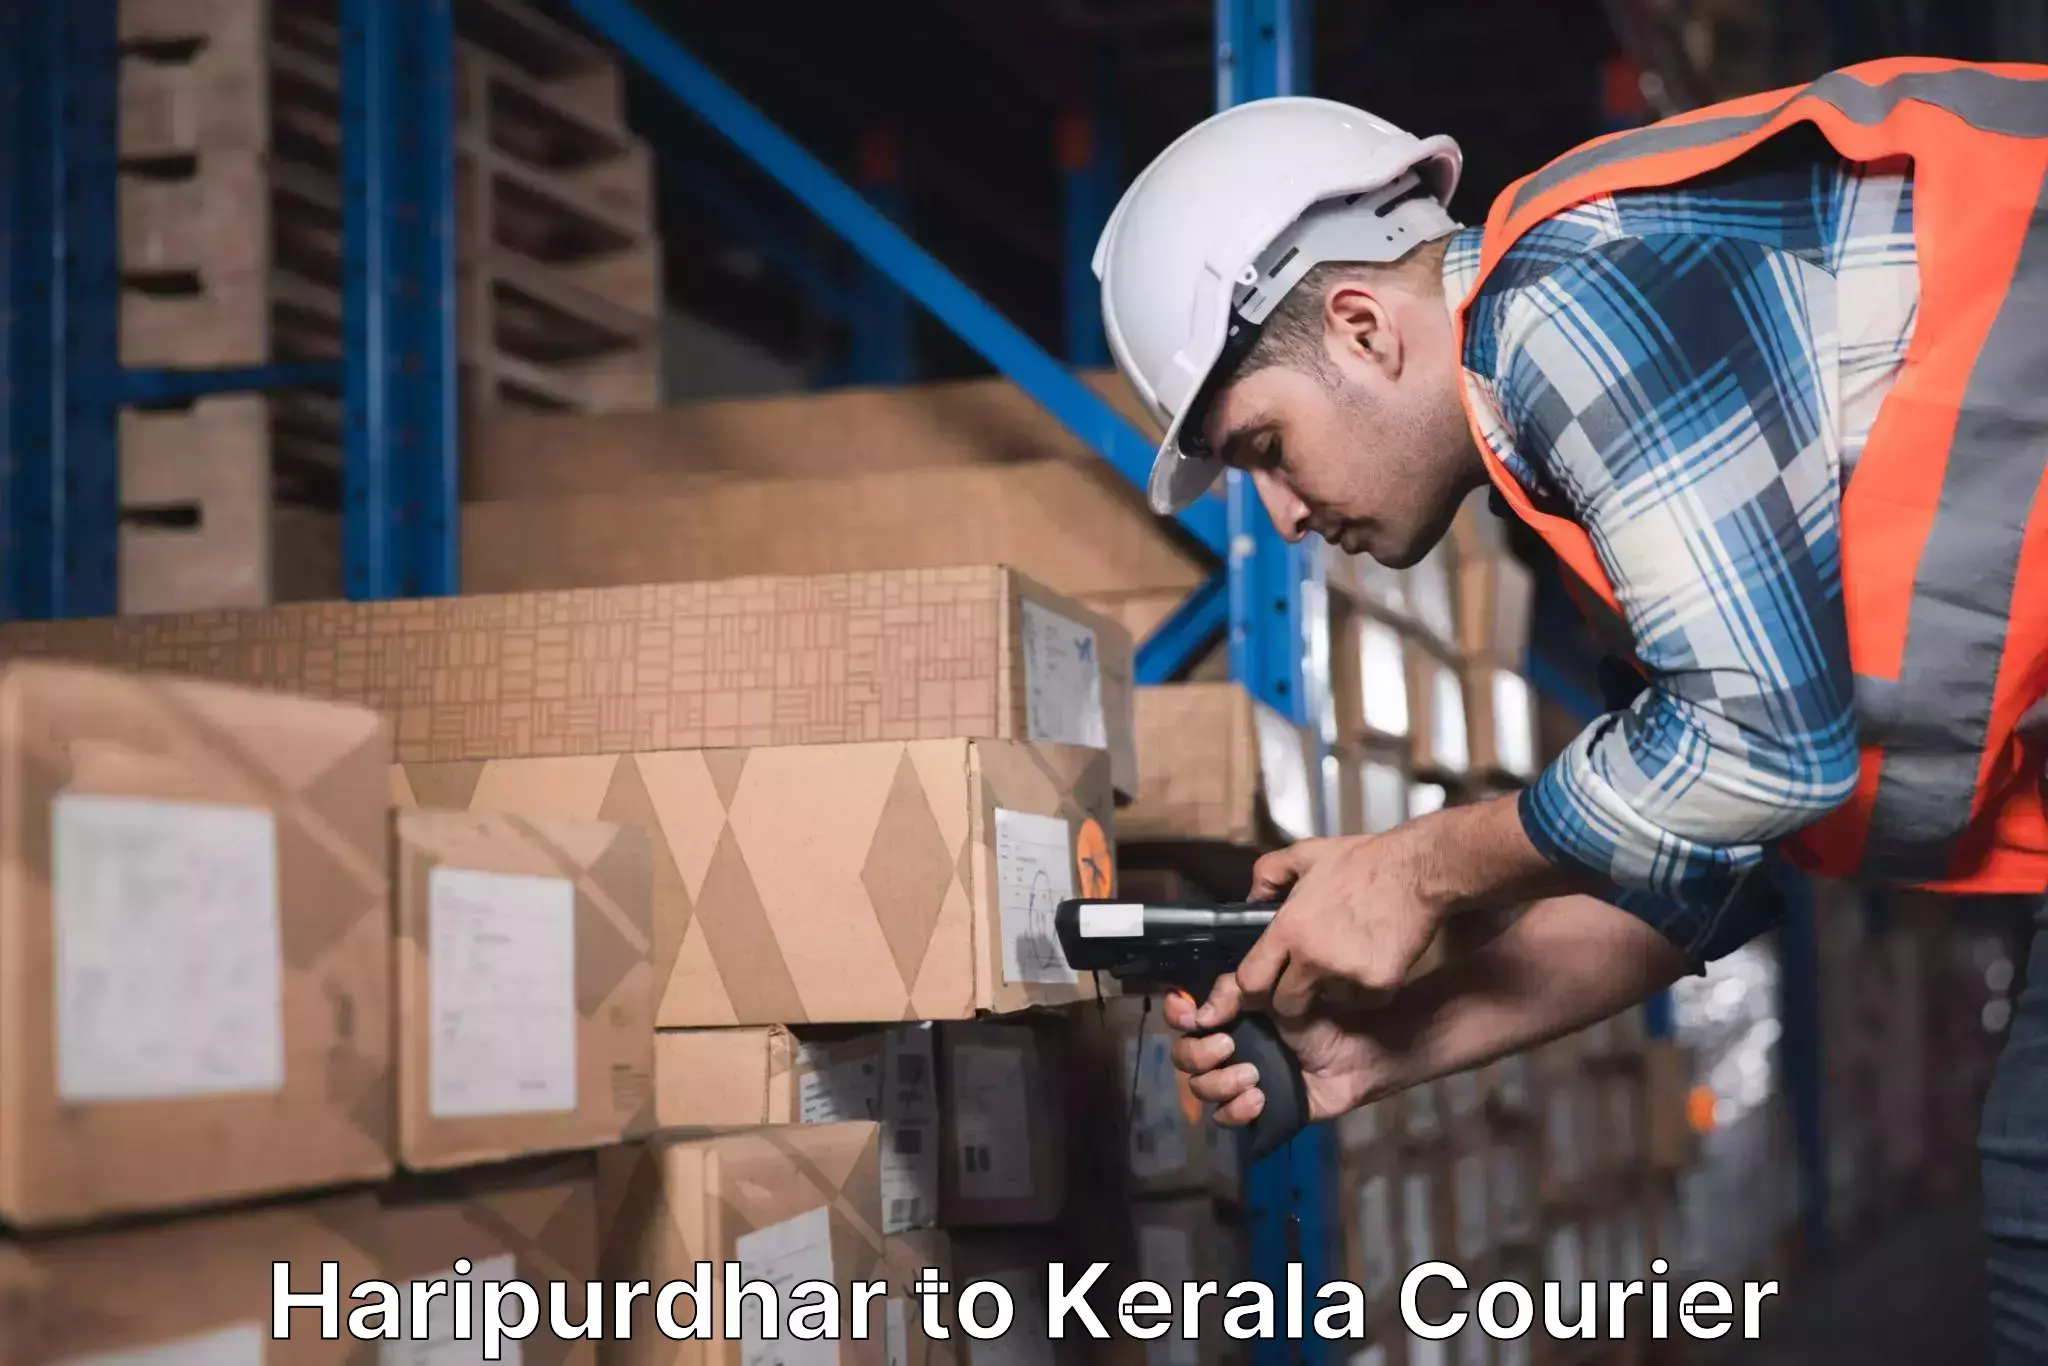 Courier dispatch services Haripurdhar to Kottayam